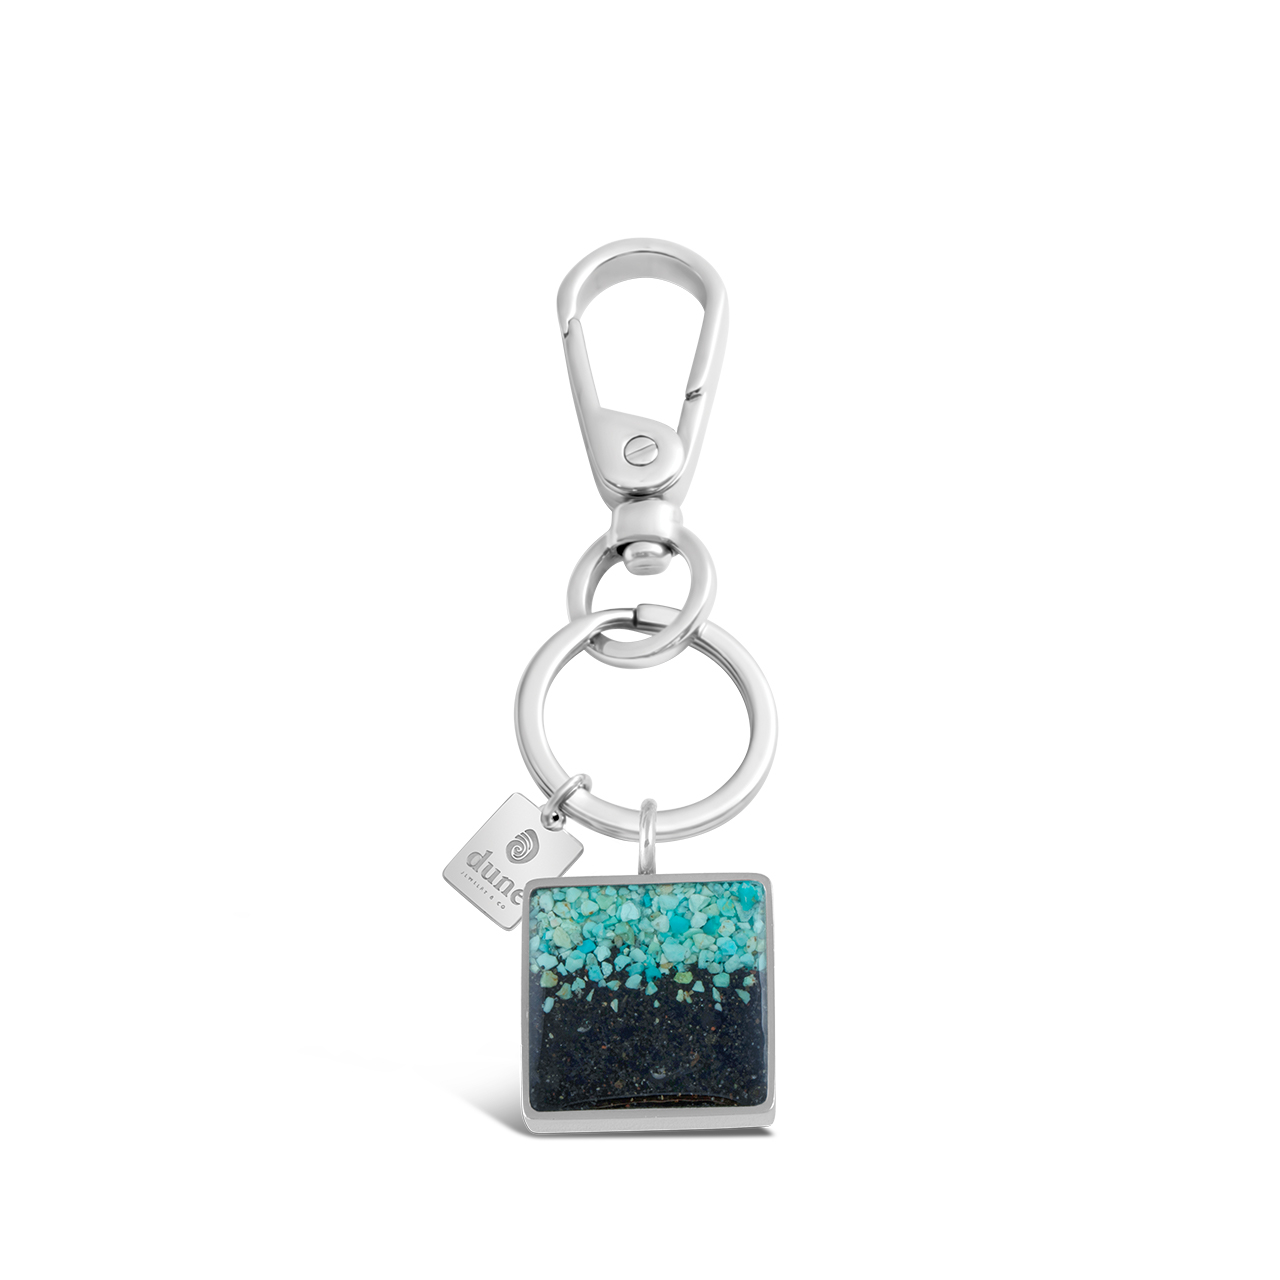 Keychain and Bag Charm - Square - Turquoise Gradient